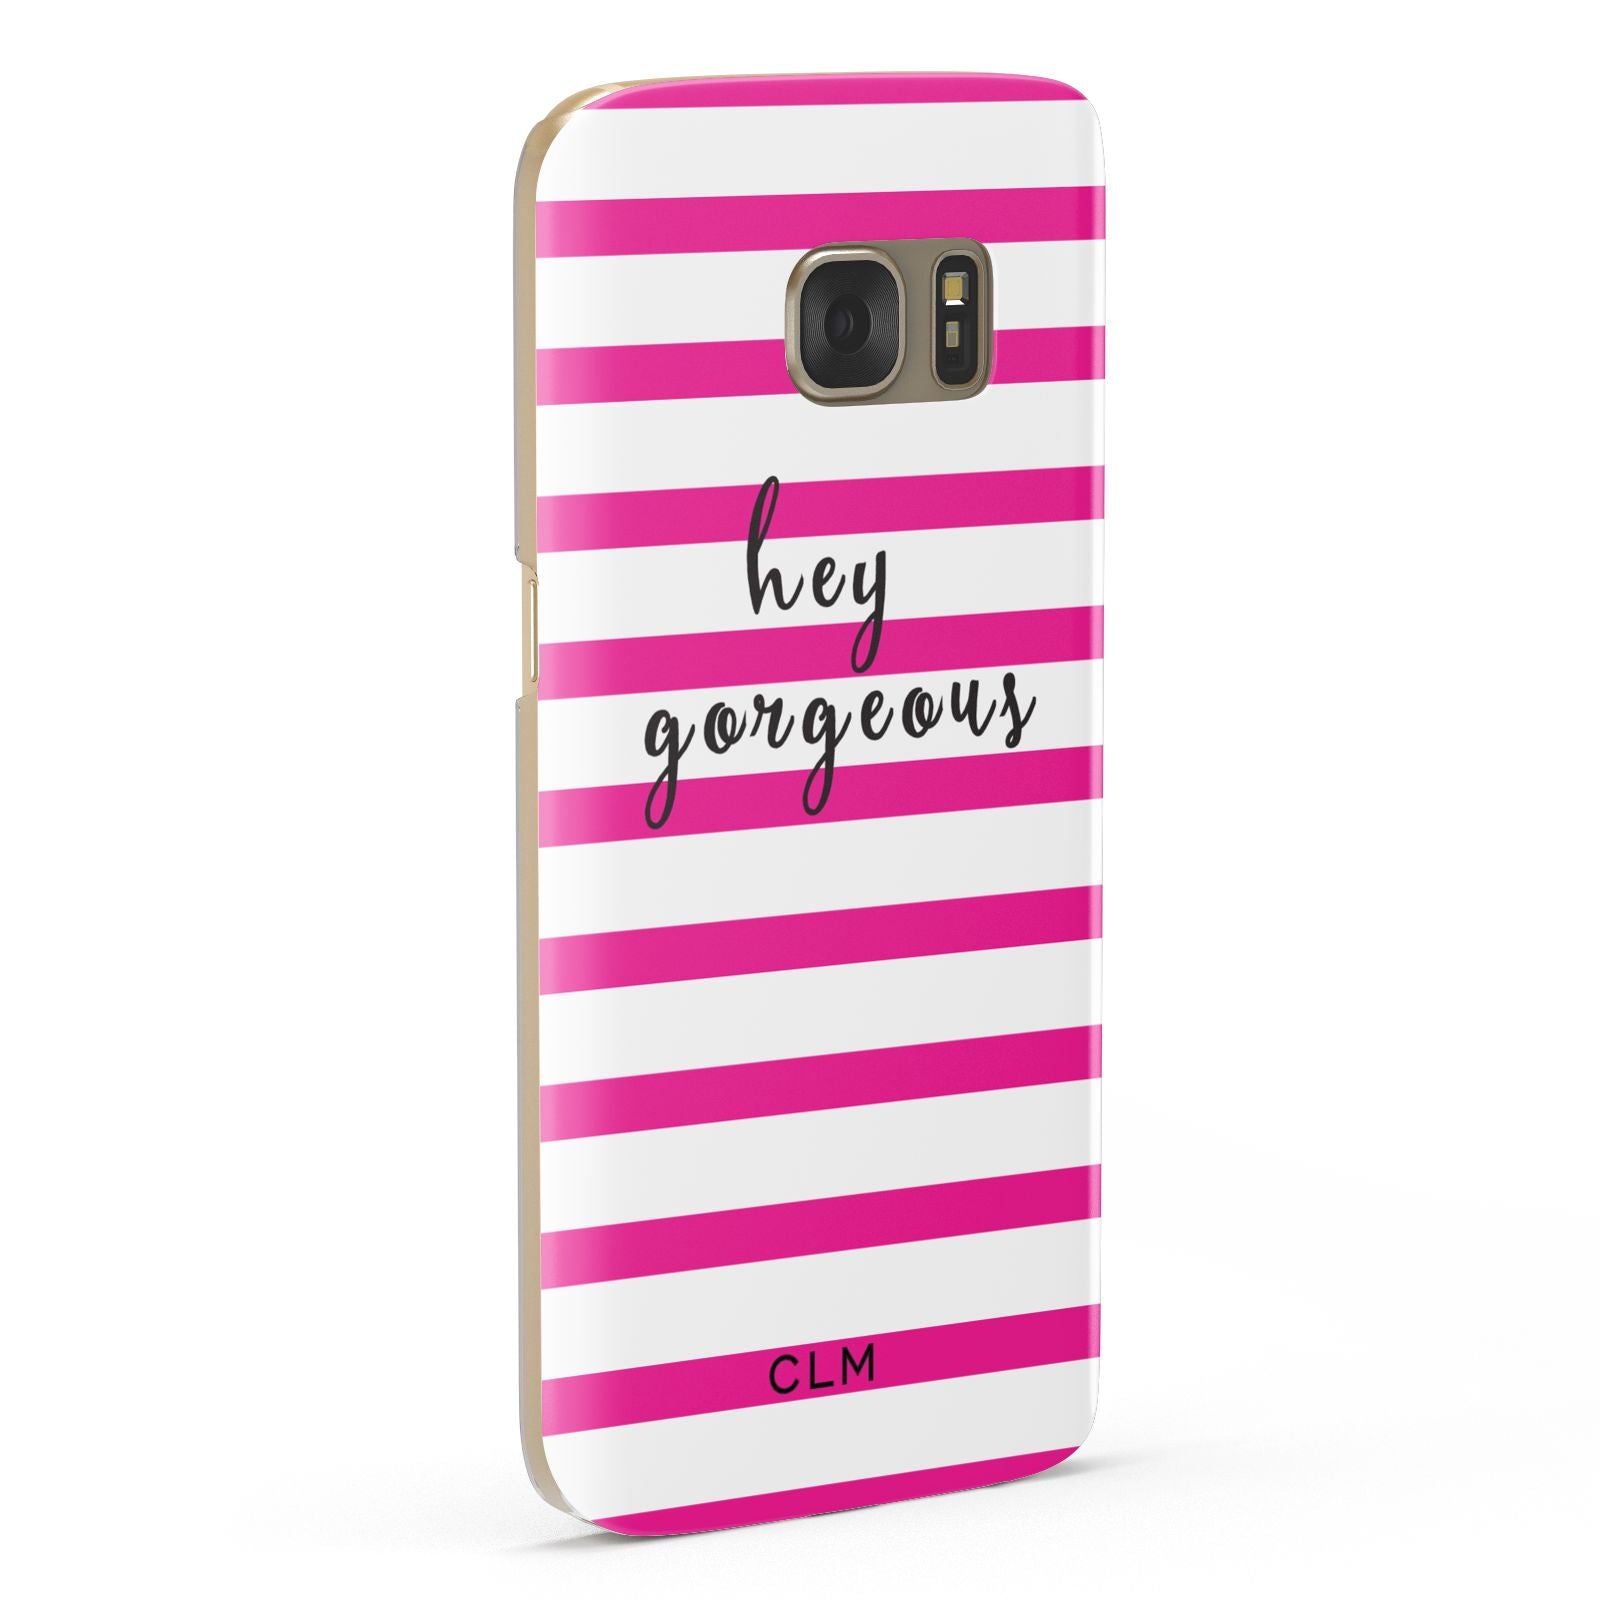 Personalised Initials Pink Striped Samsung Galaxy Case Fourty Five Degrees